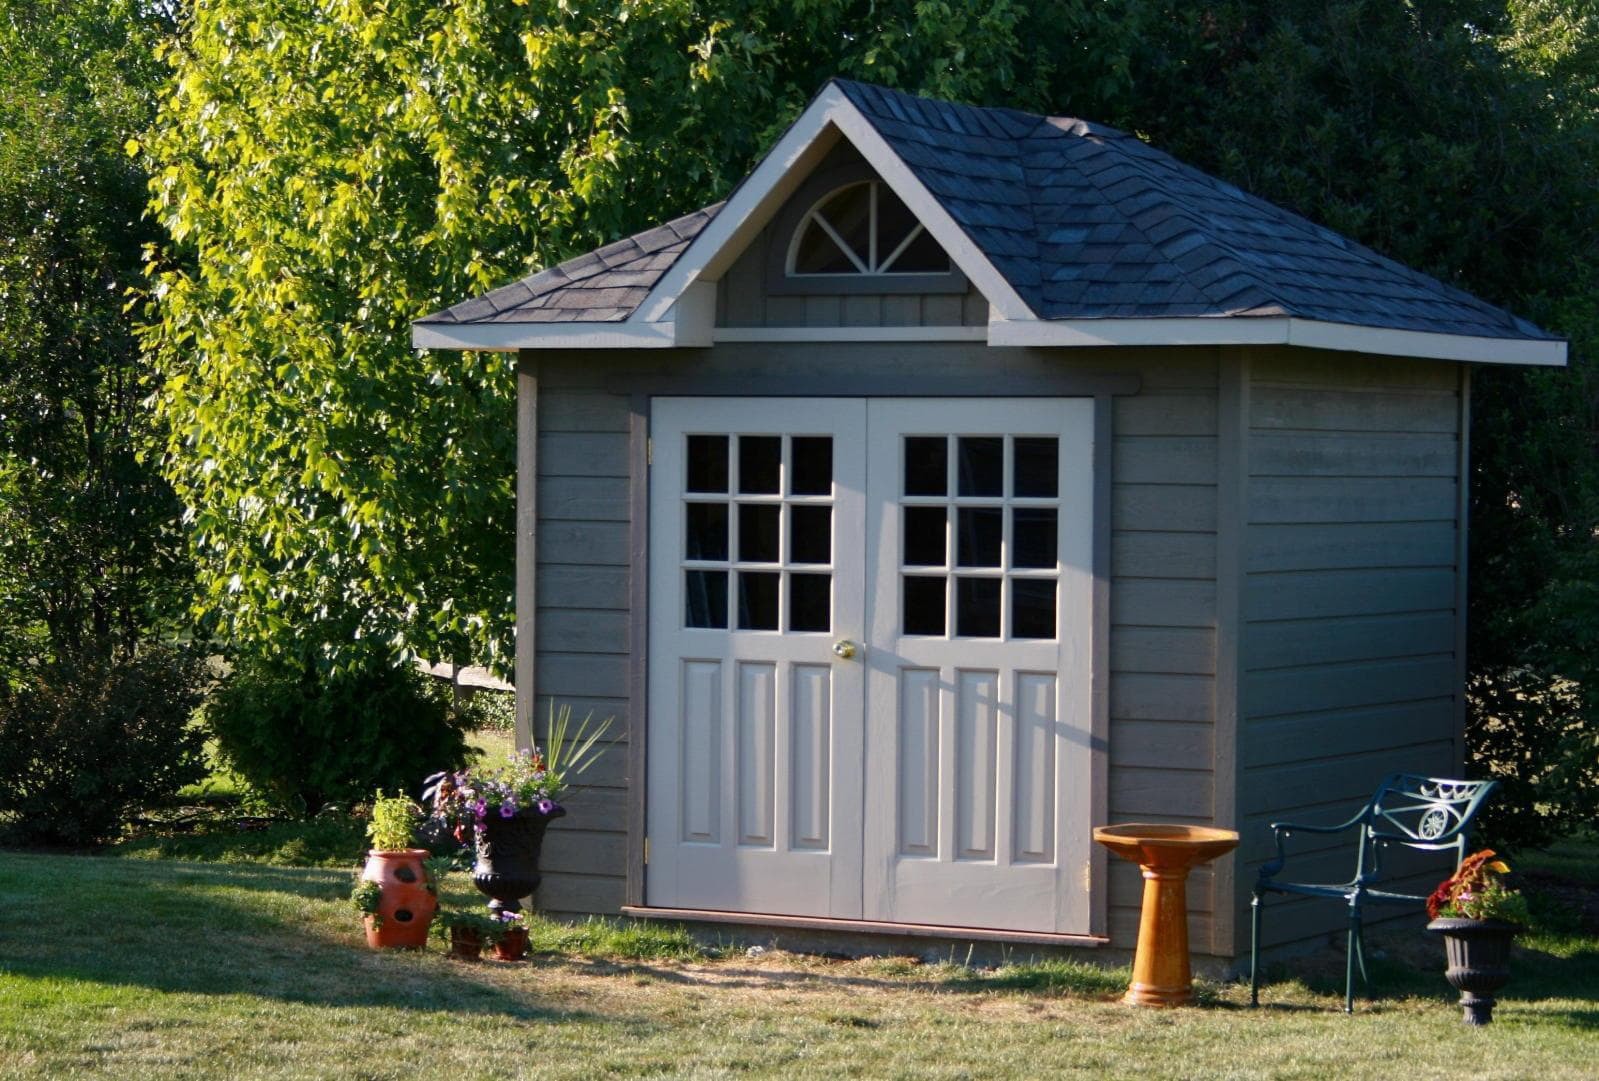 Sonoma 7x9 cabins with double doors in Mokena Illinois. ID number 223820-1